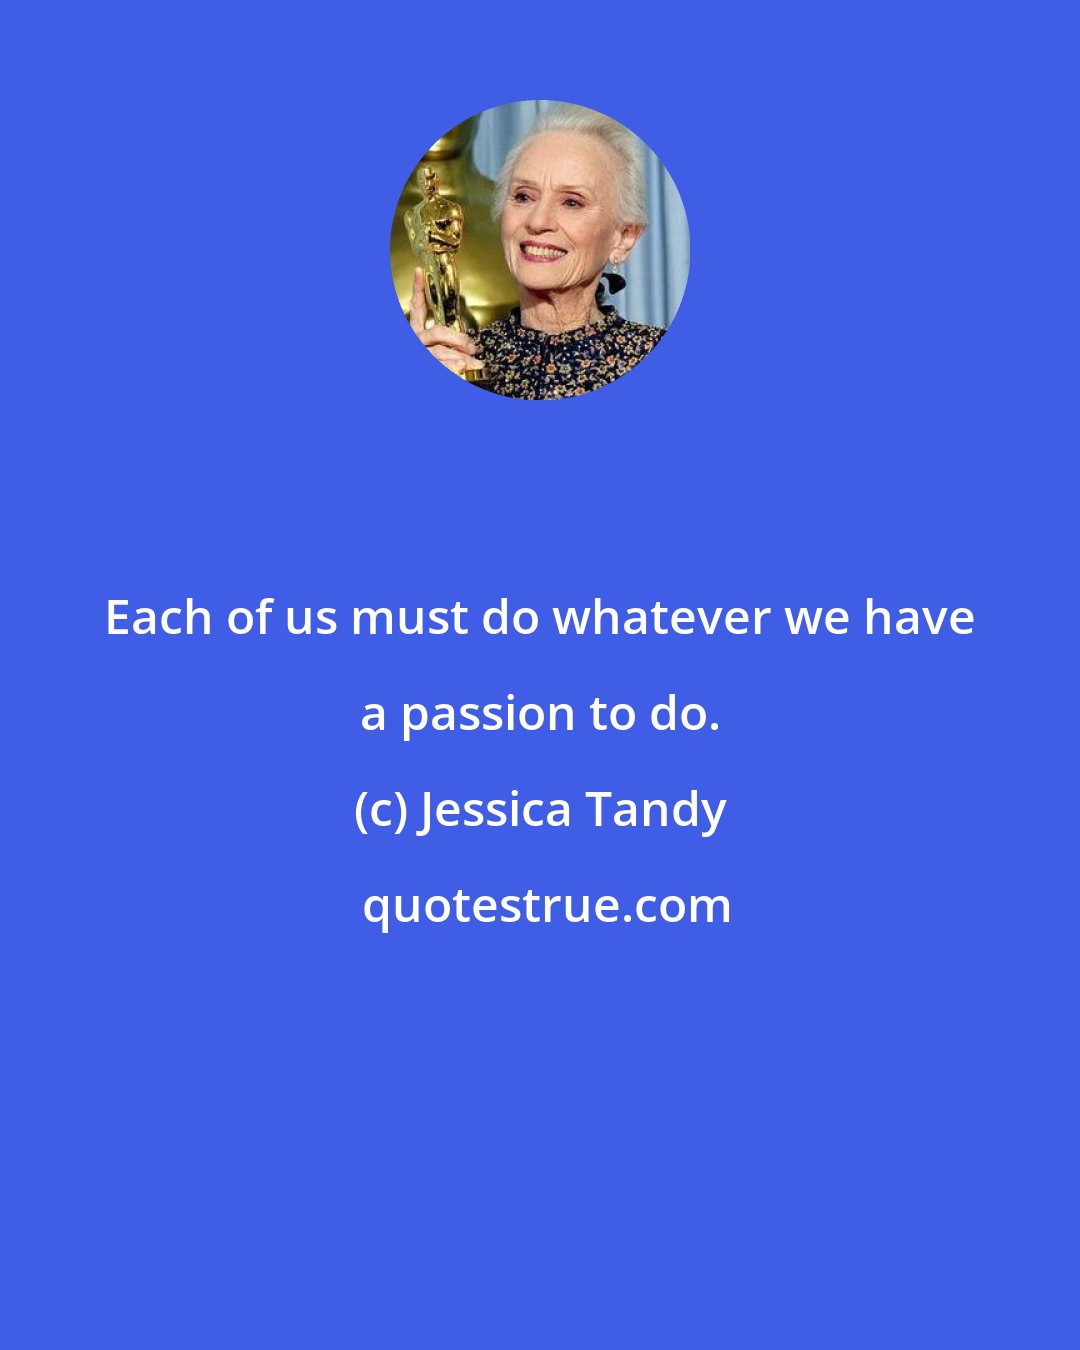 Jessica Tandy: Each of us must do whatever we have a passion to do.